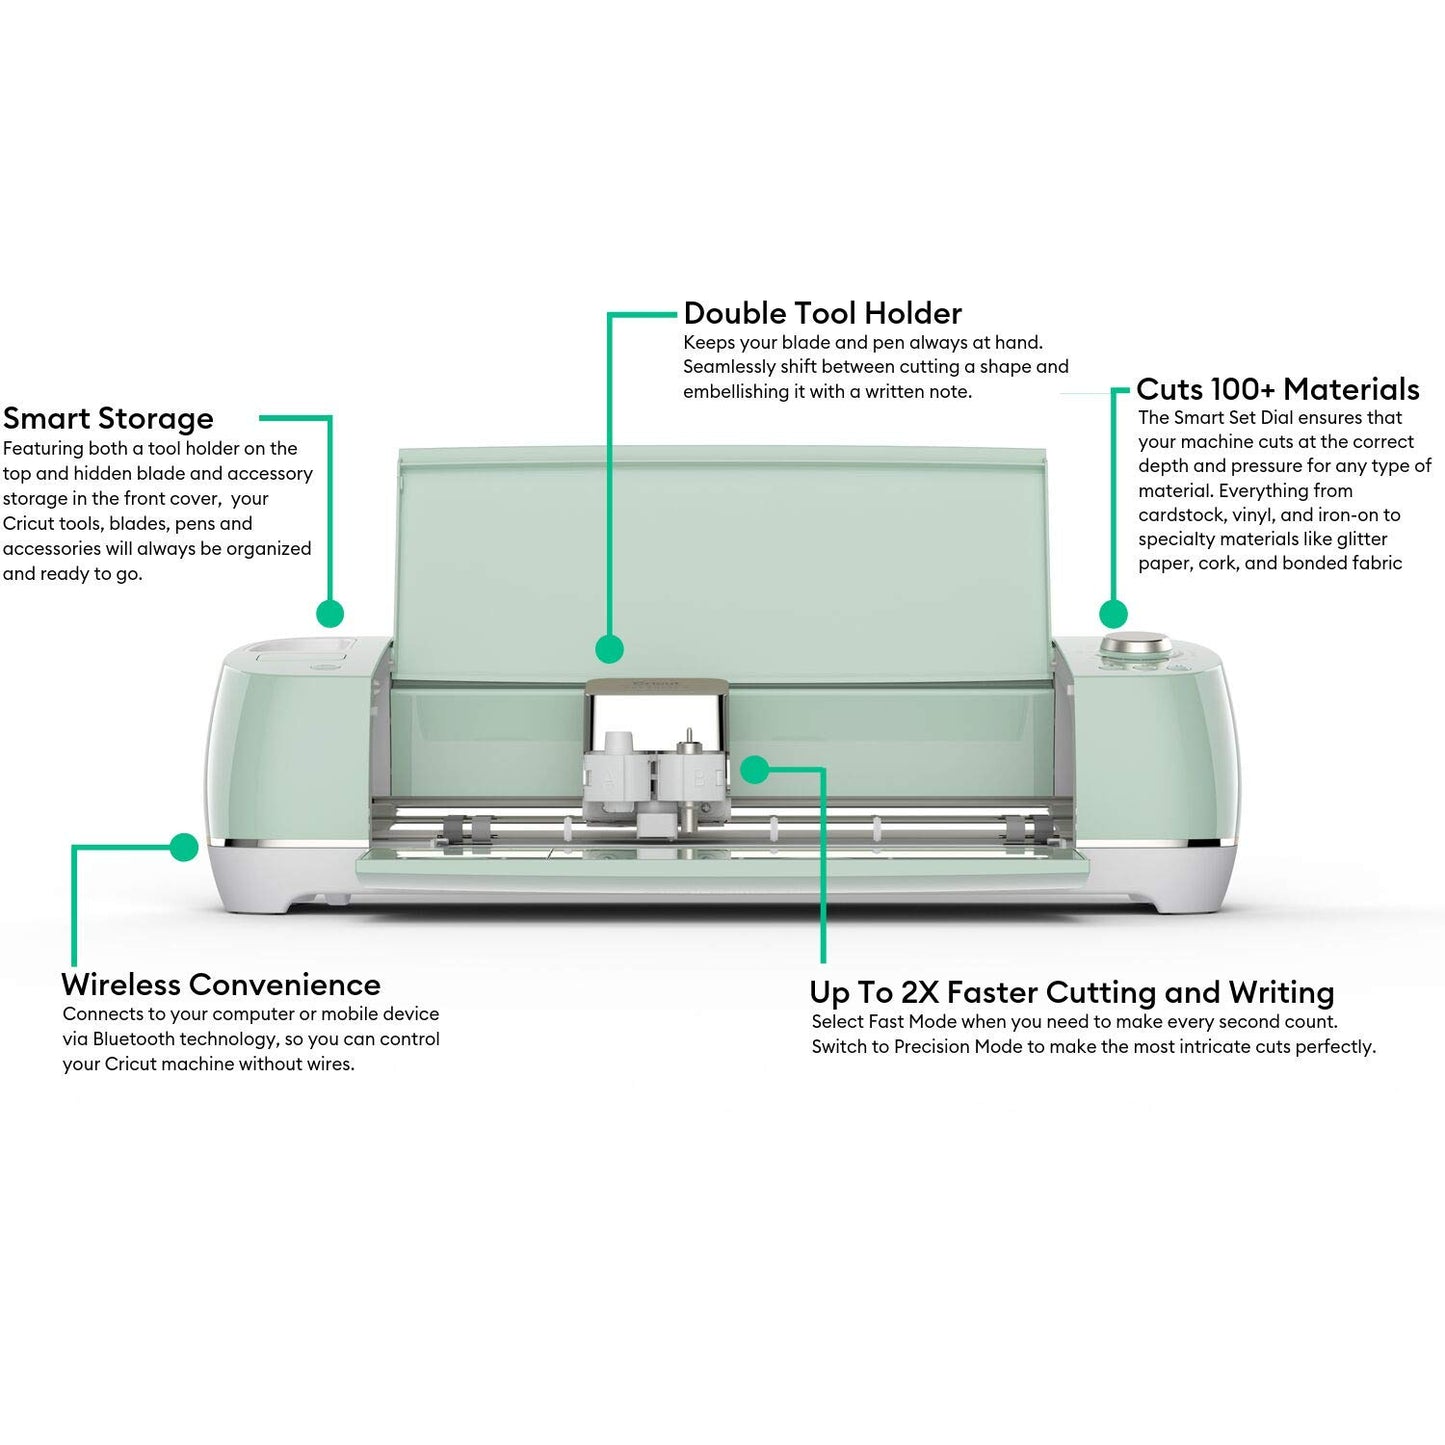 Cricut Explore Air 2 - A DIY Cutting Machine for all Crafts, Create Customized Cards, Home Decor & More, Bluetooth Connectivity, Compatible with iOS,